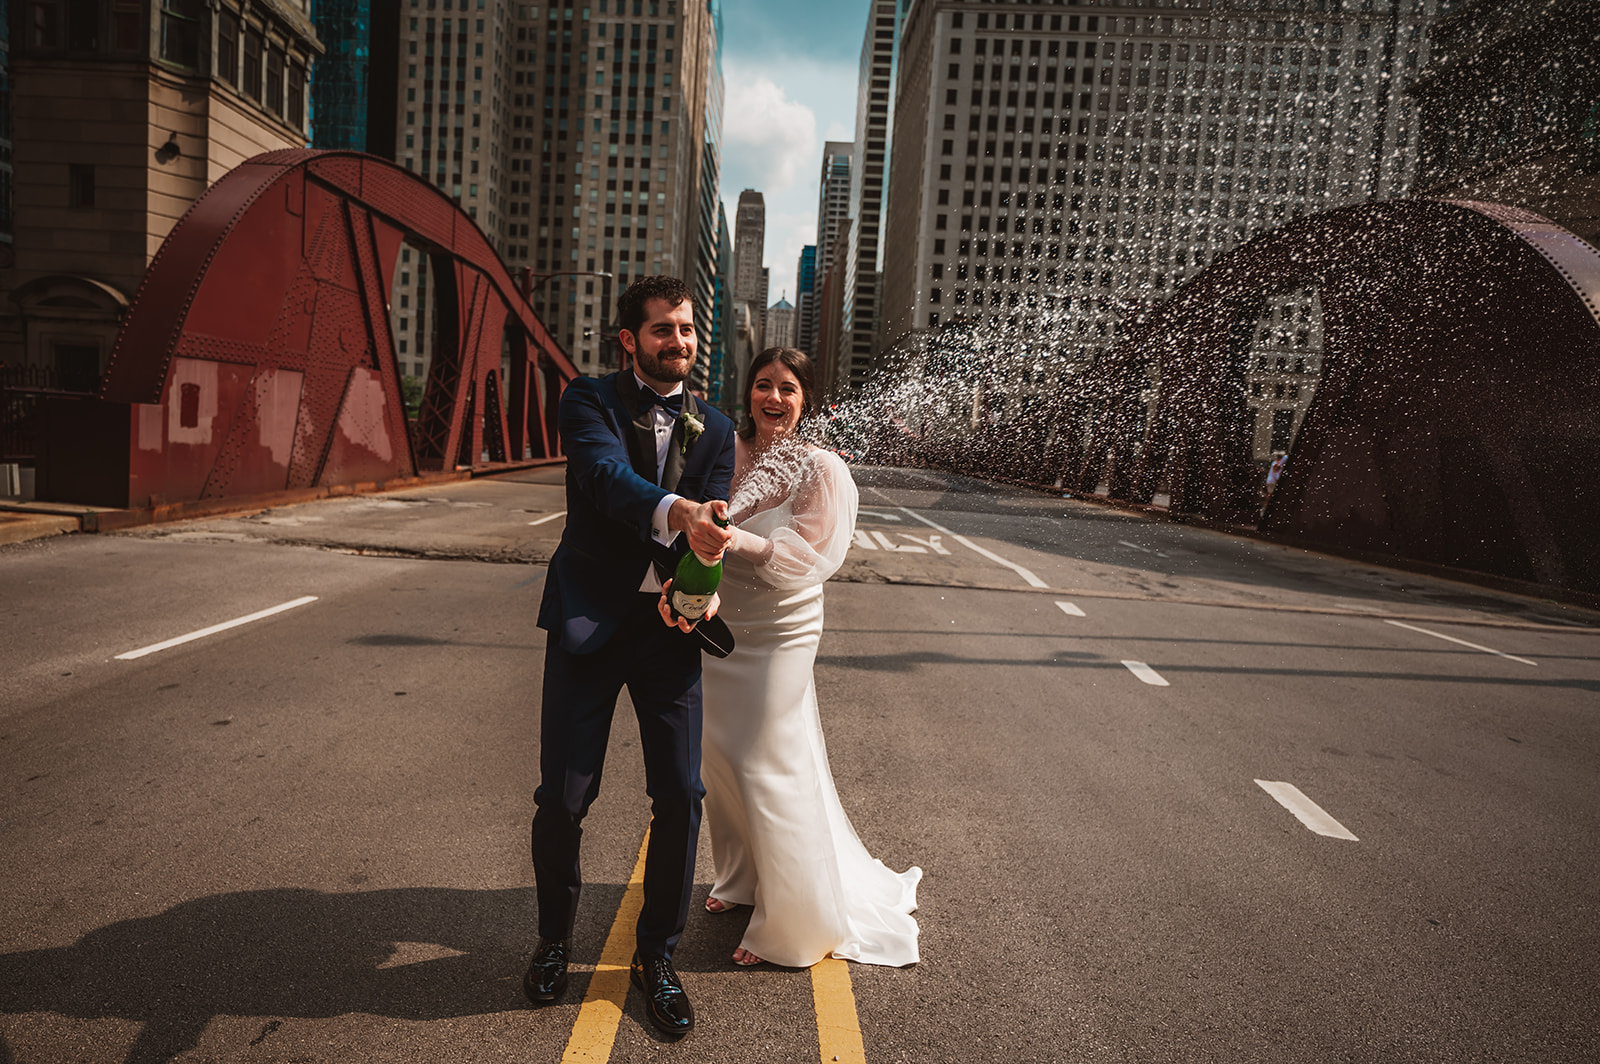 Bride and groom in the middle of the street spraying champagne LaSalle Street Chicago